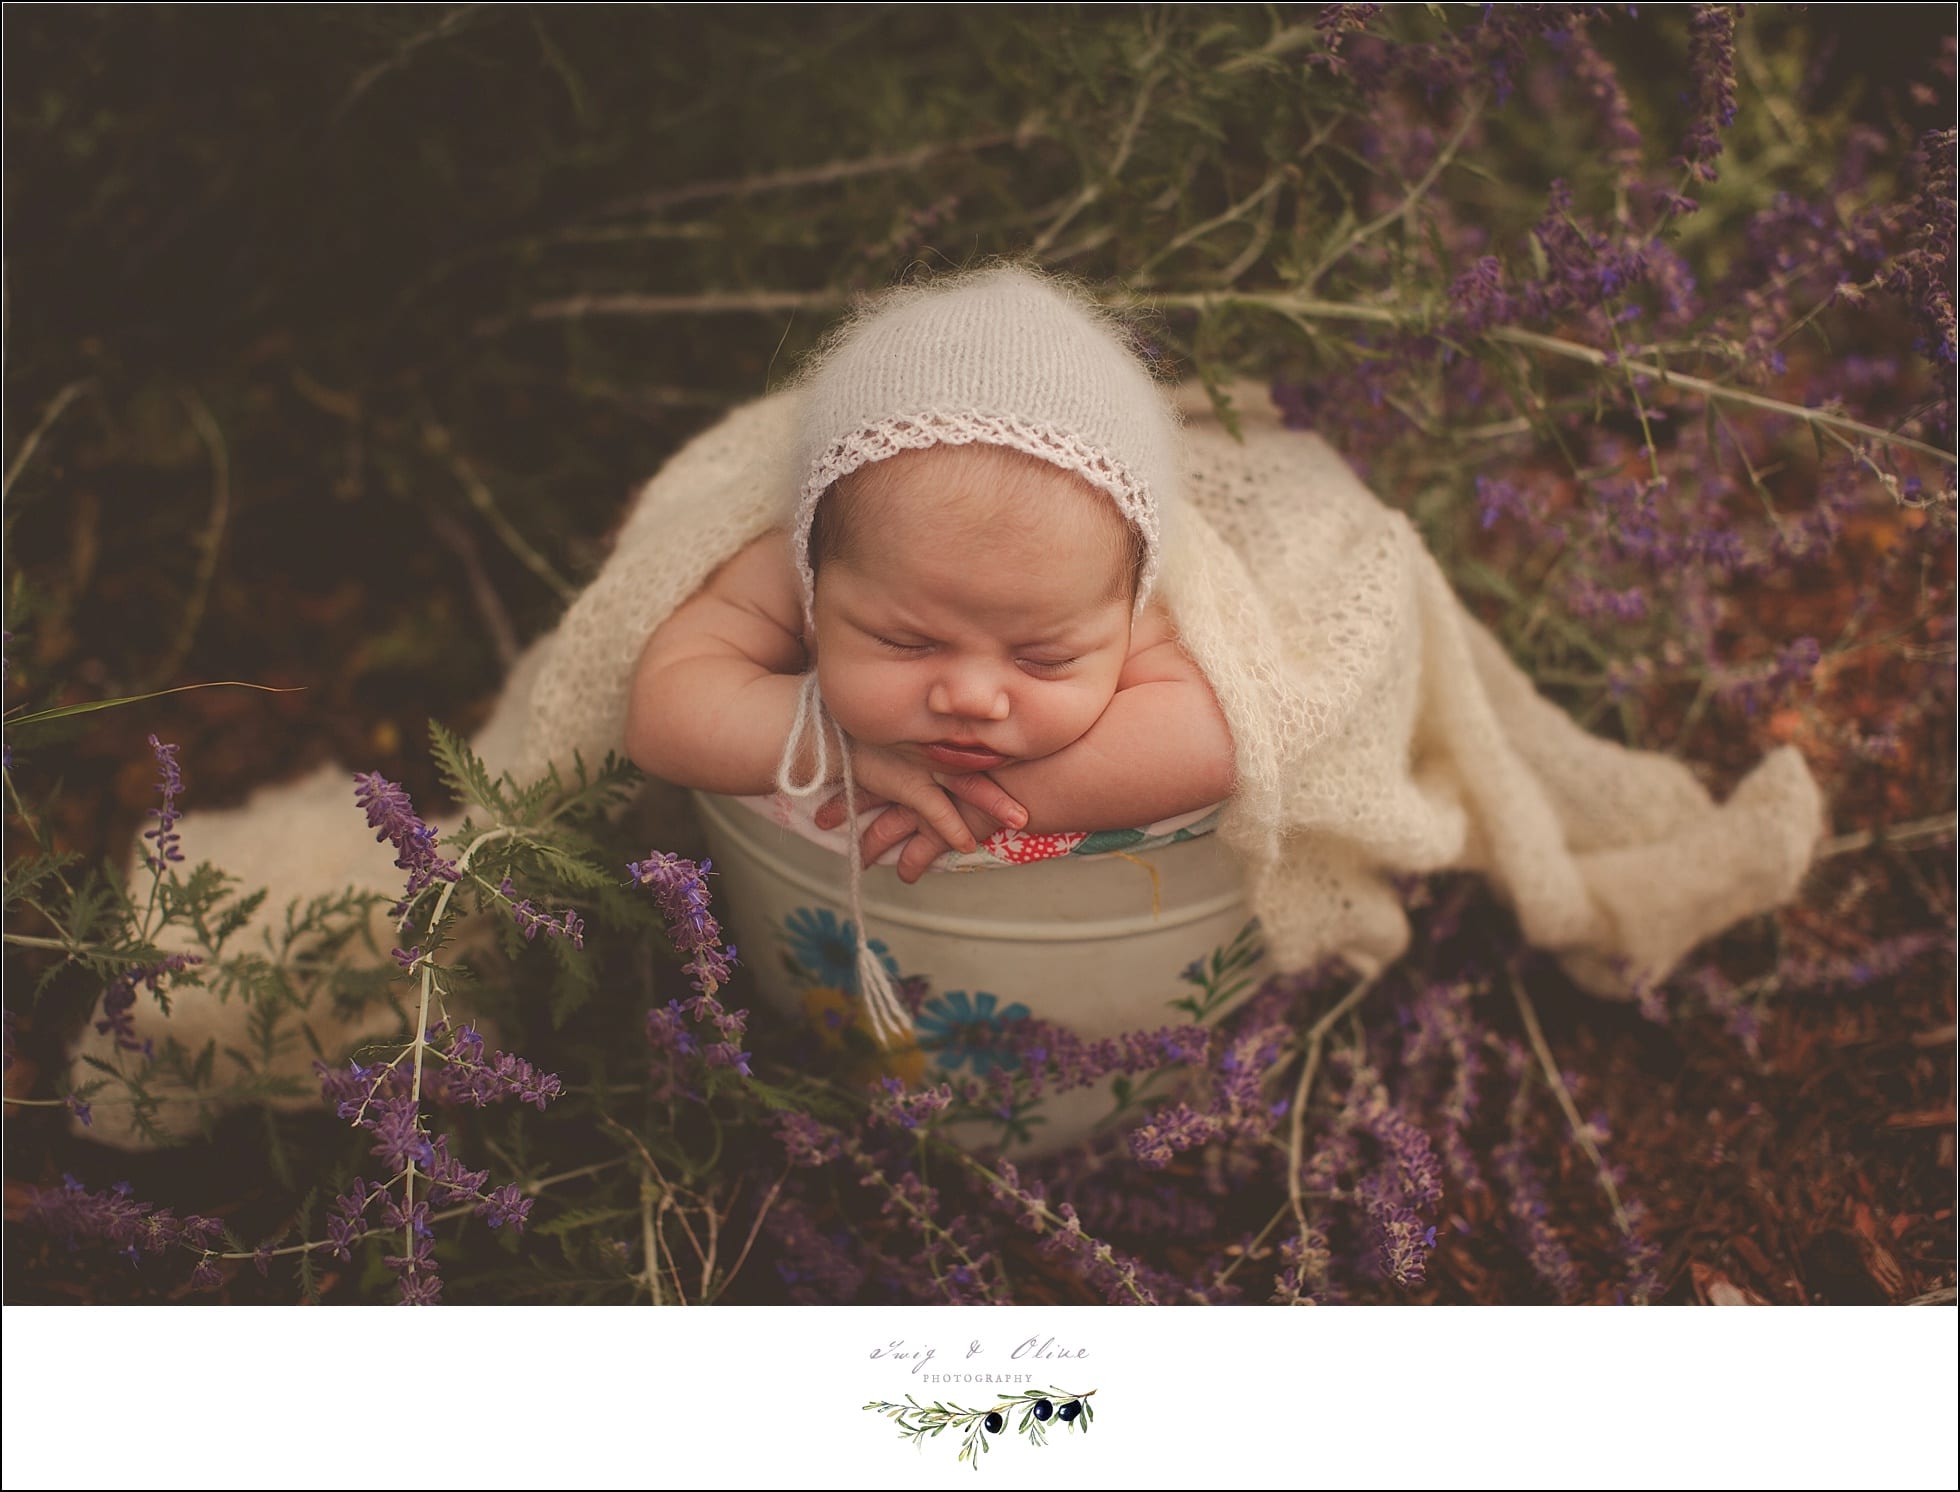 bonnets and blankets and purple flowers